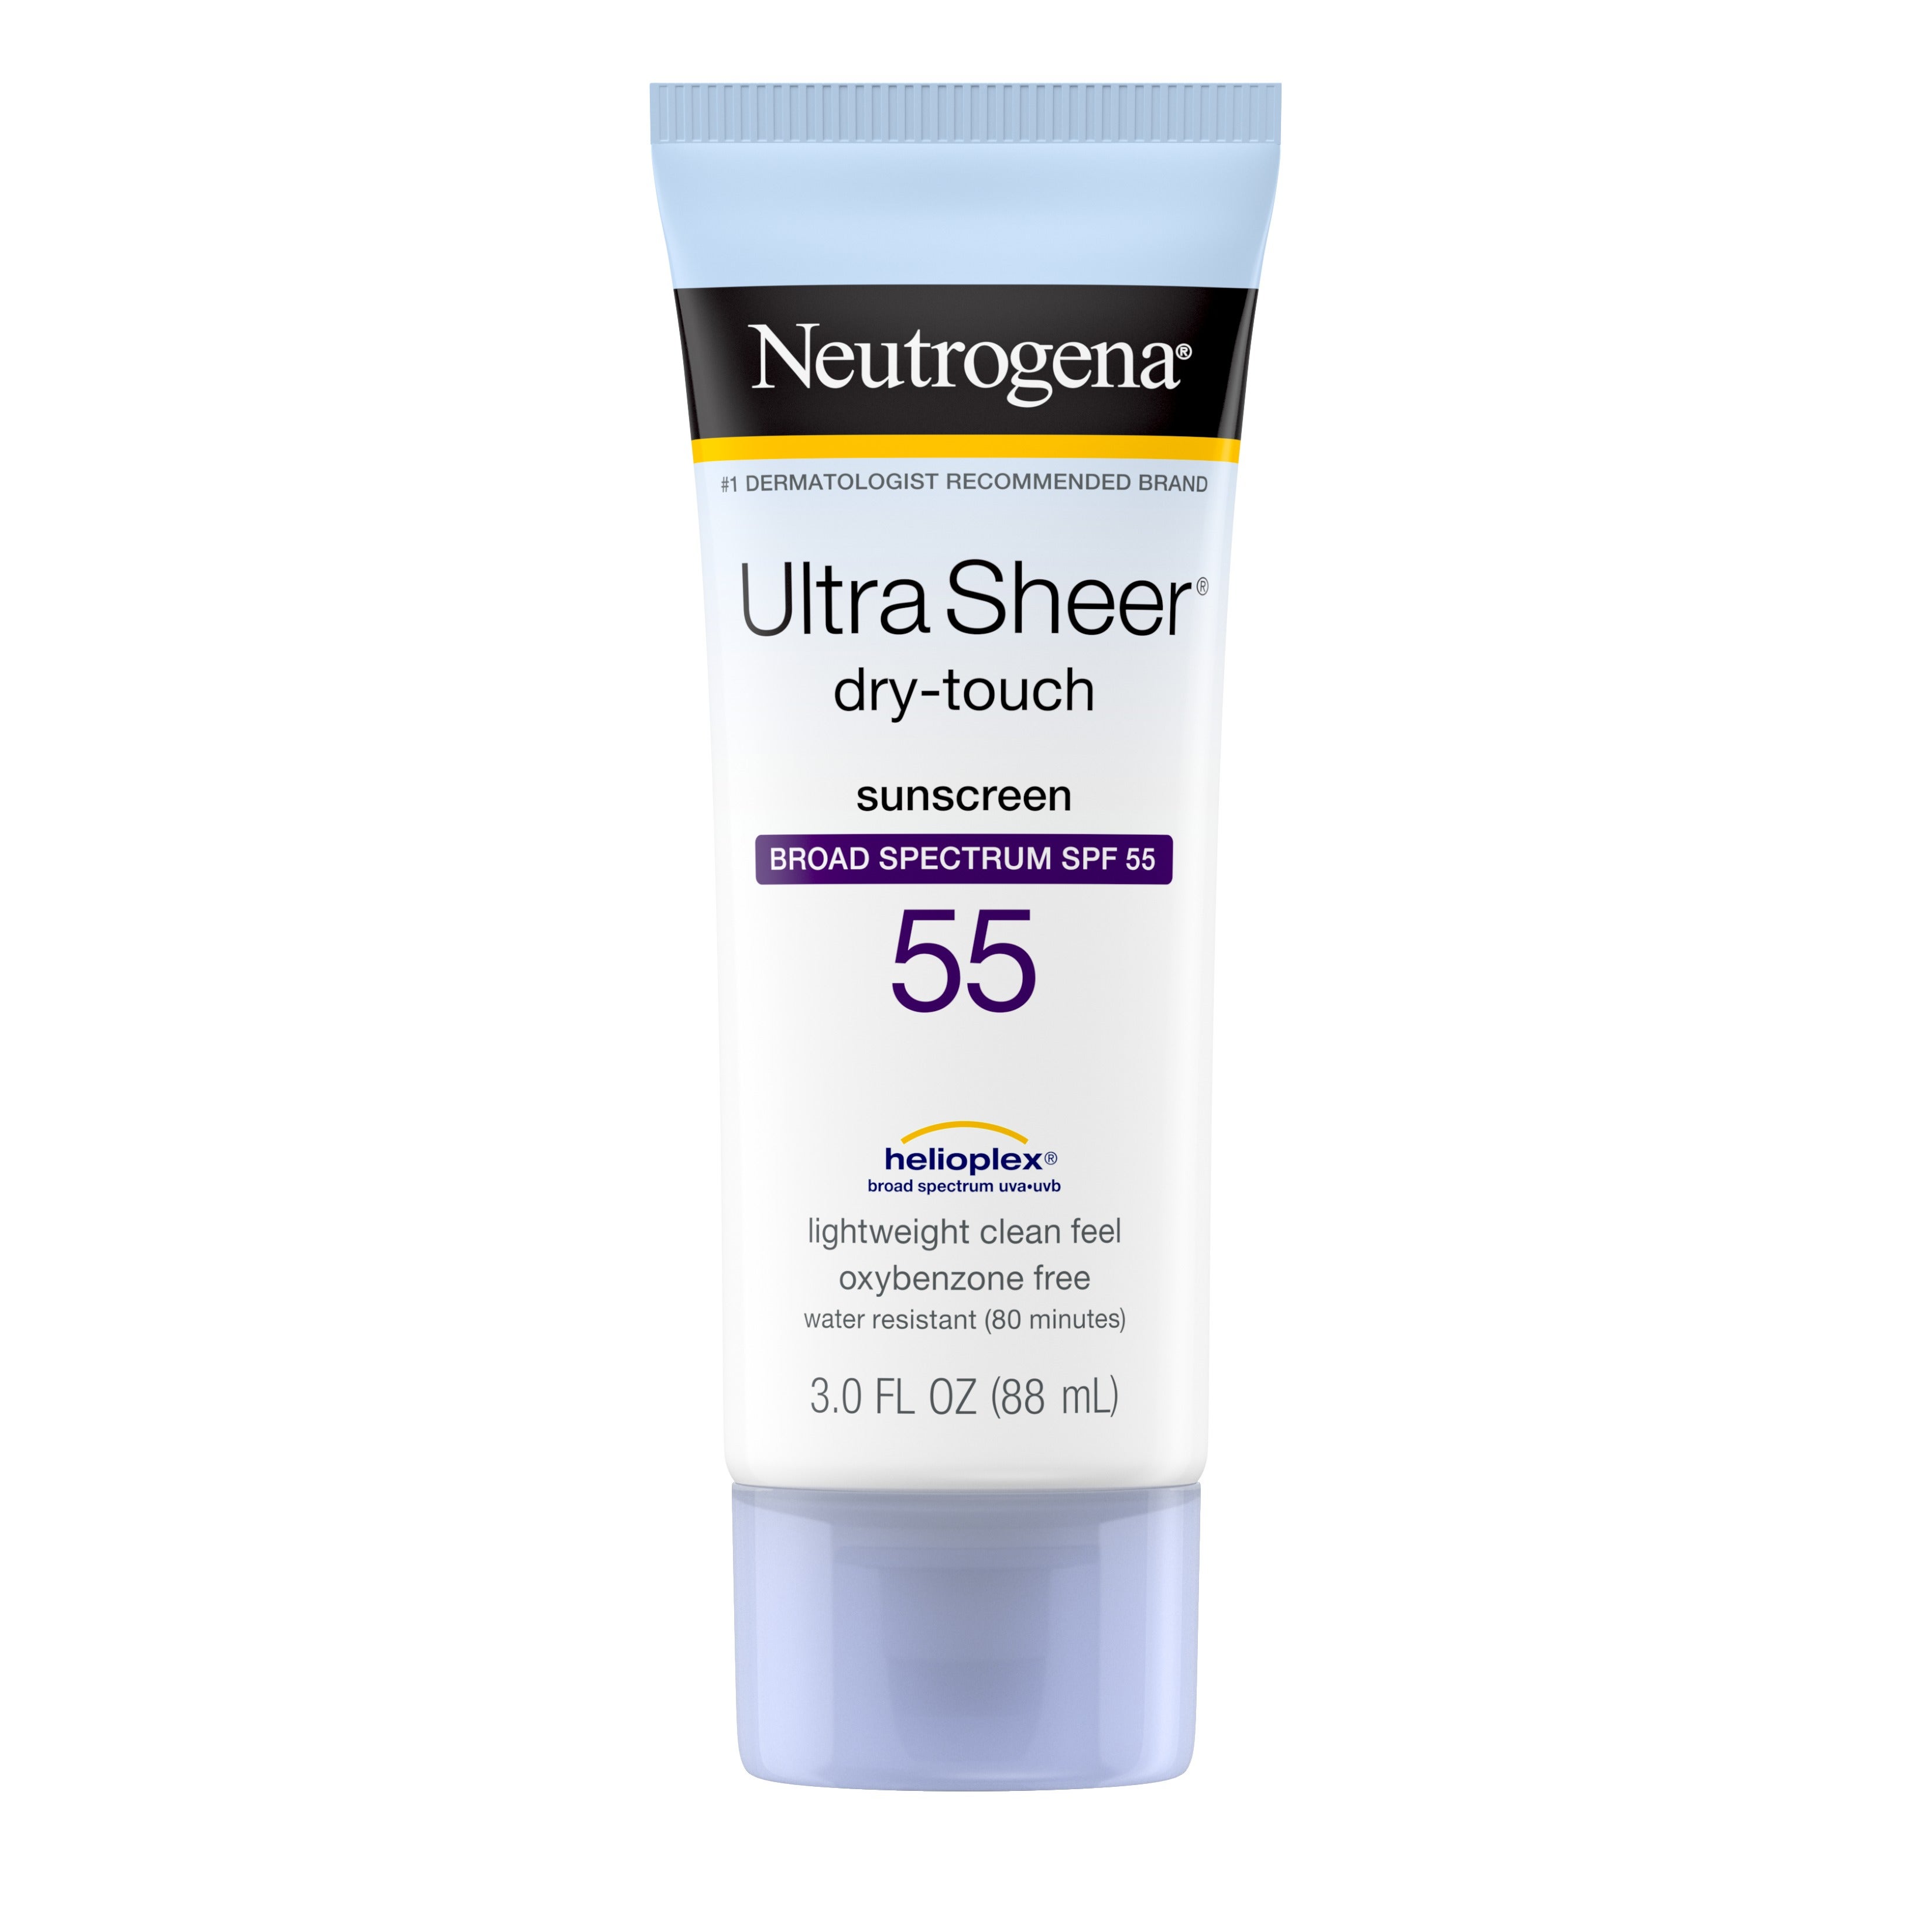 Ultra Sheer Dry-Touch SPF 55 Sunscreen Lotion